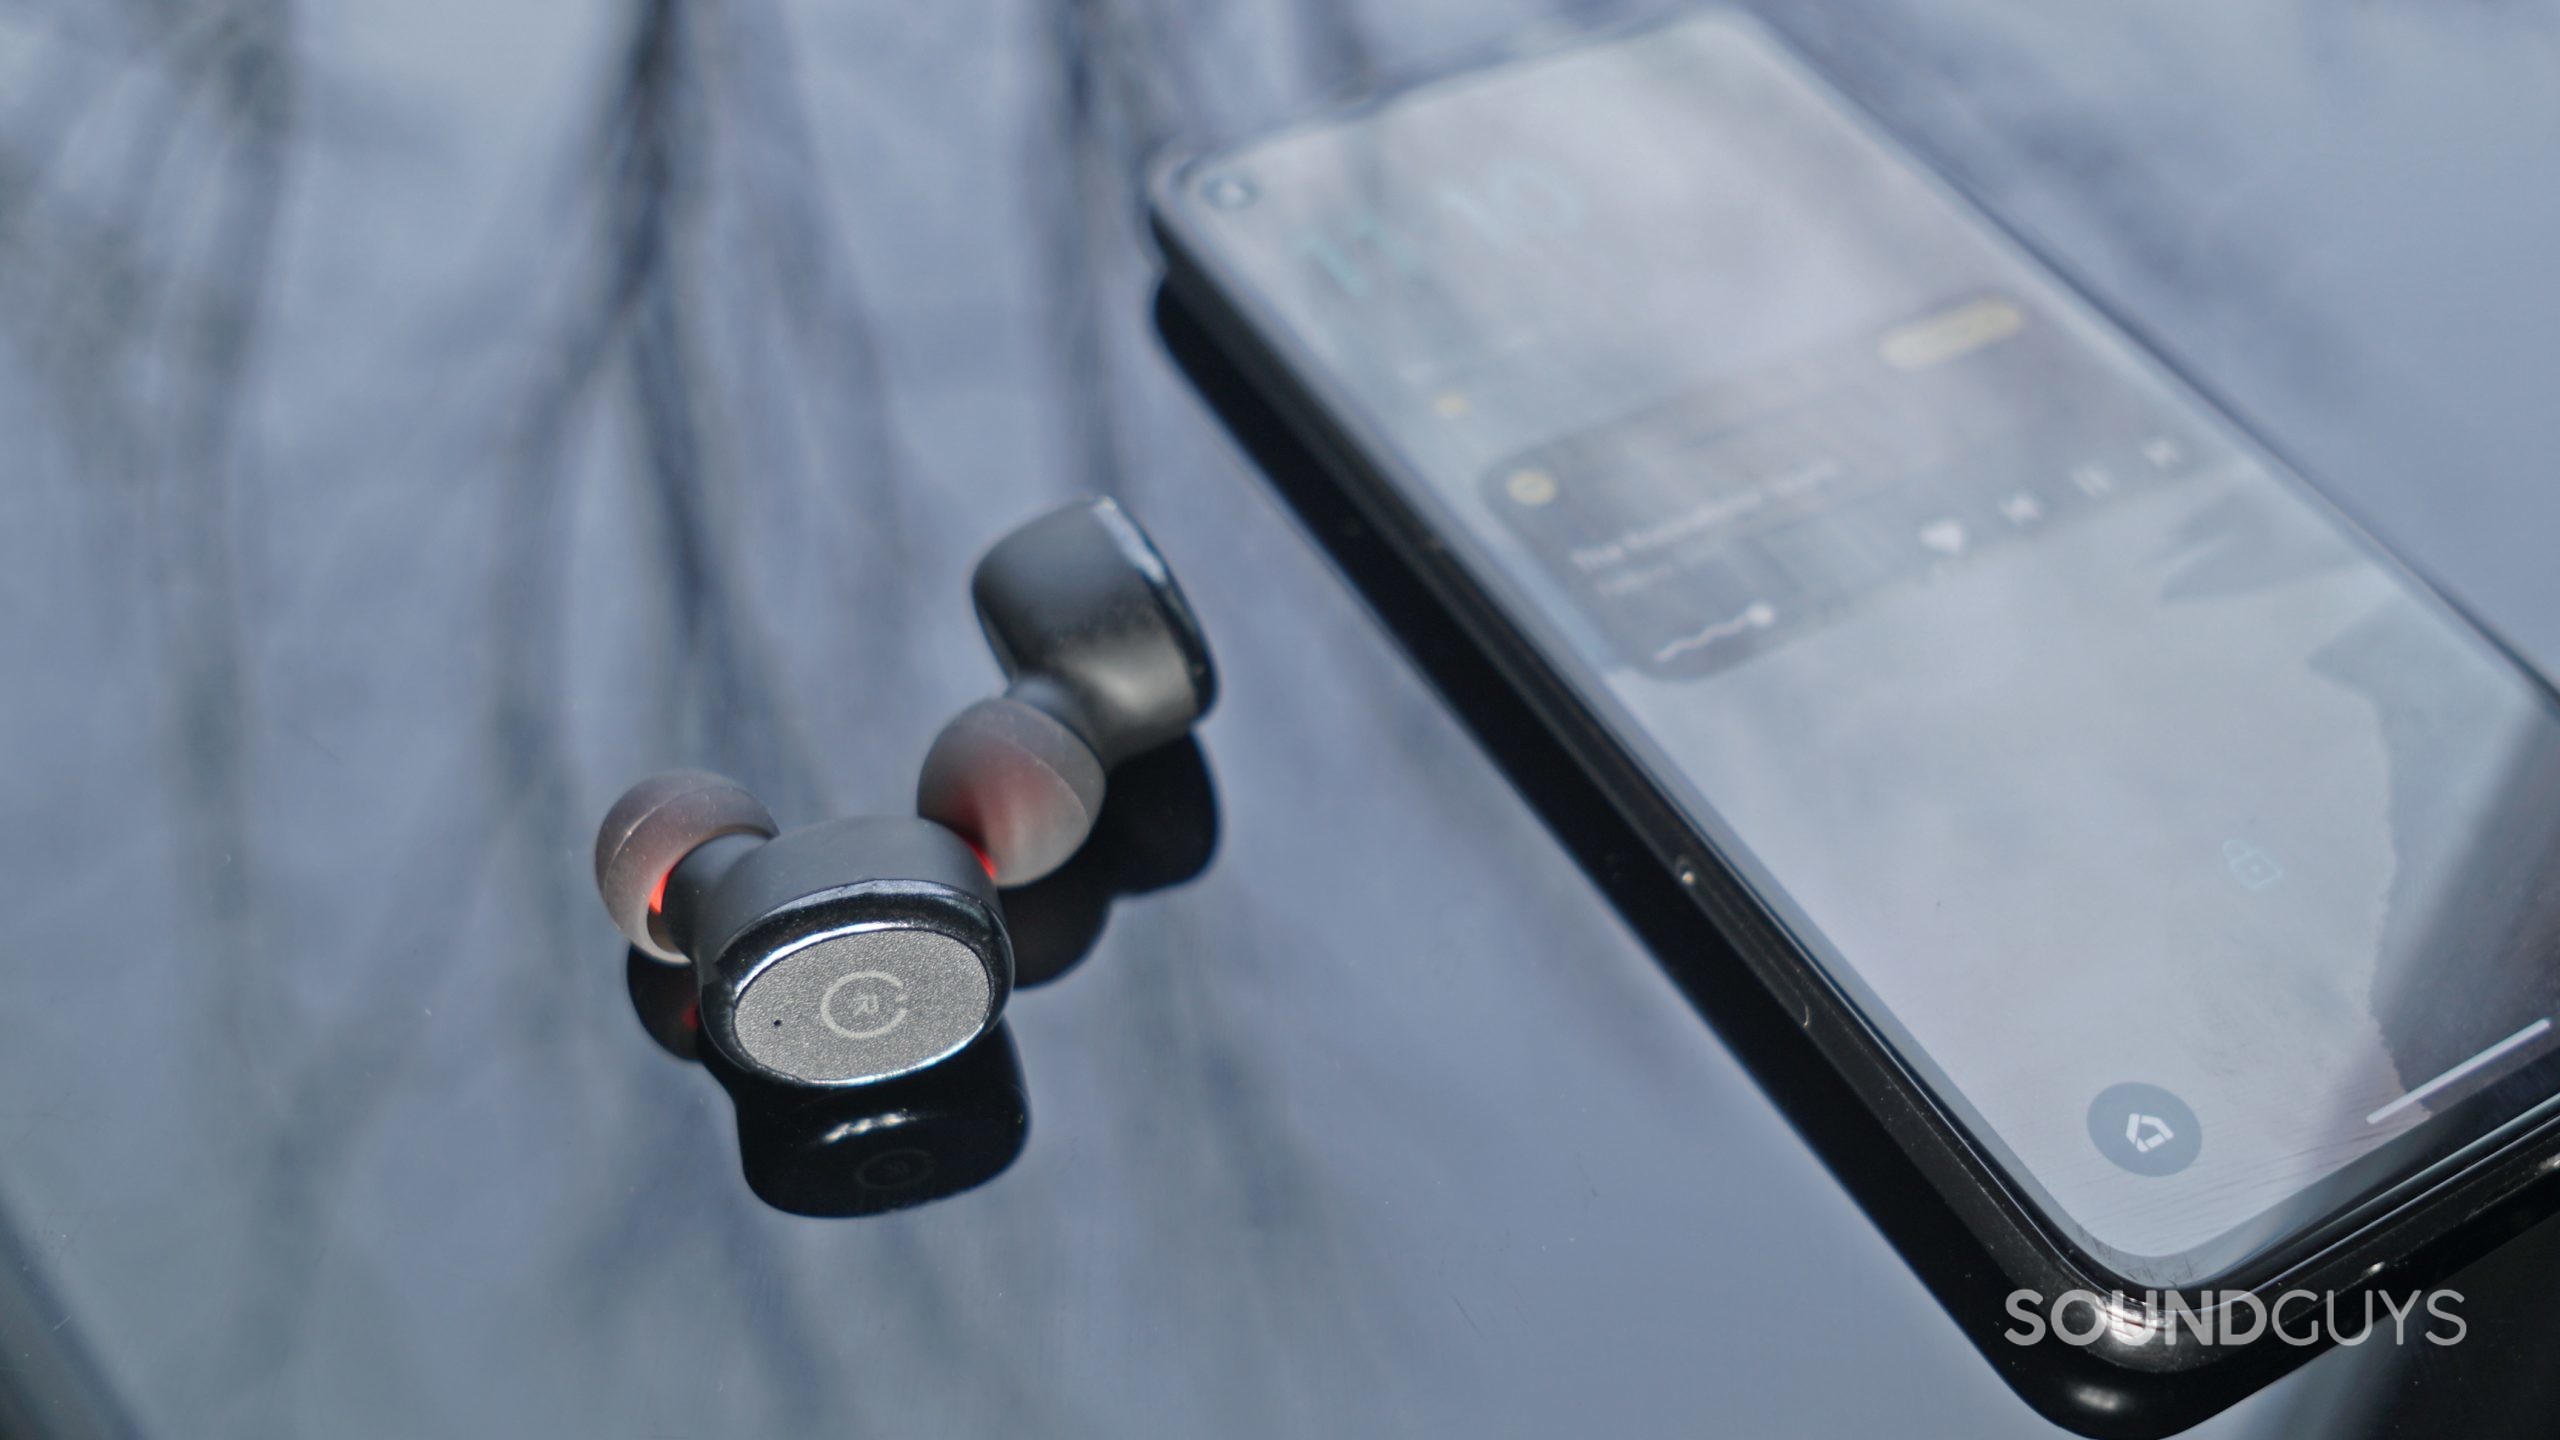 The TOZO T10 lays on a reflective black surface next to a Pixel 4a running Spotify